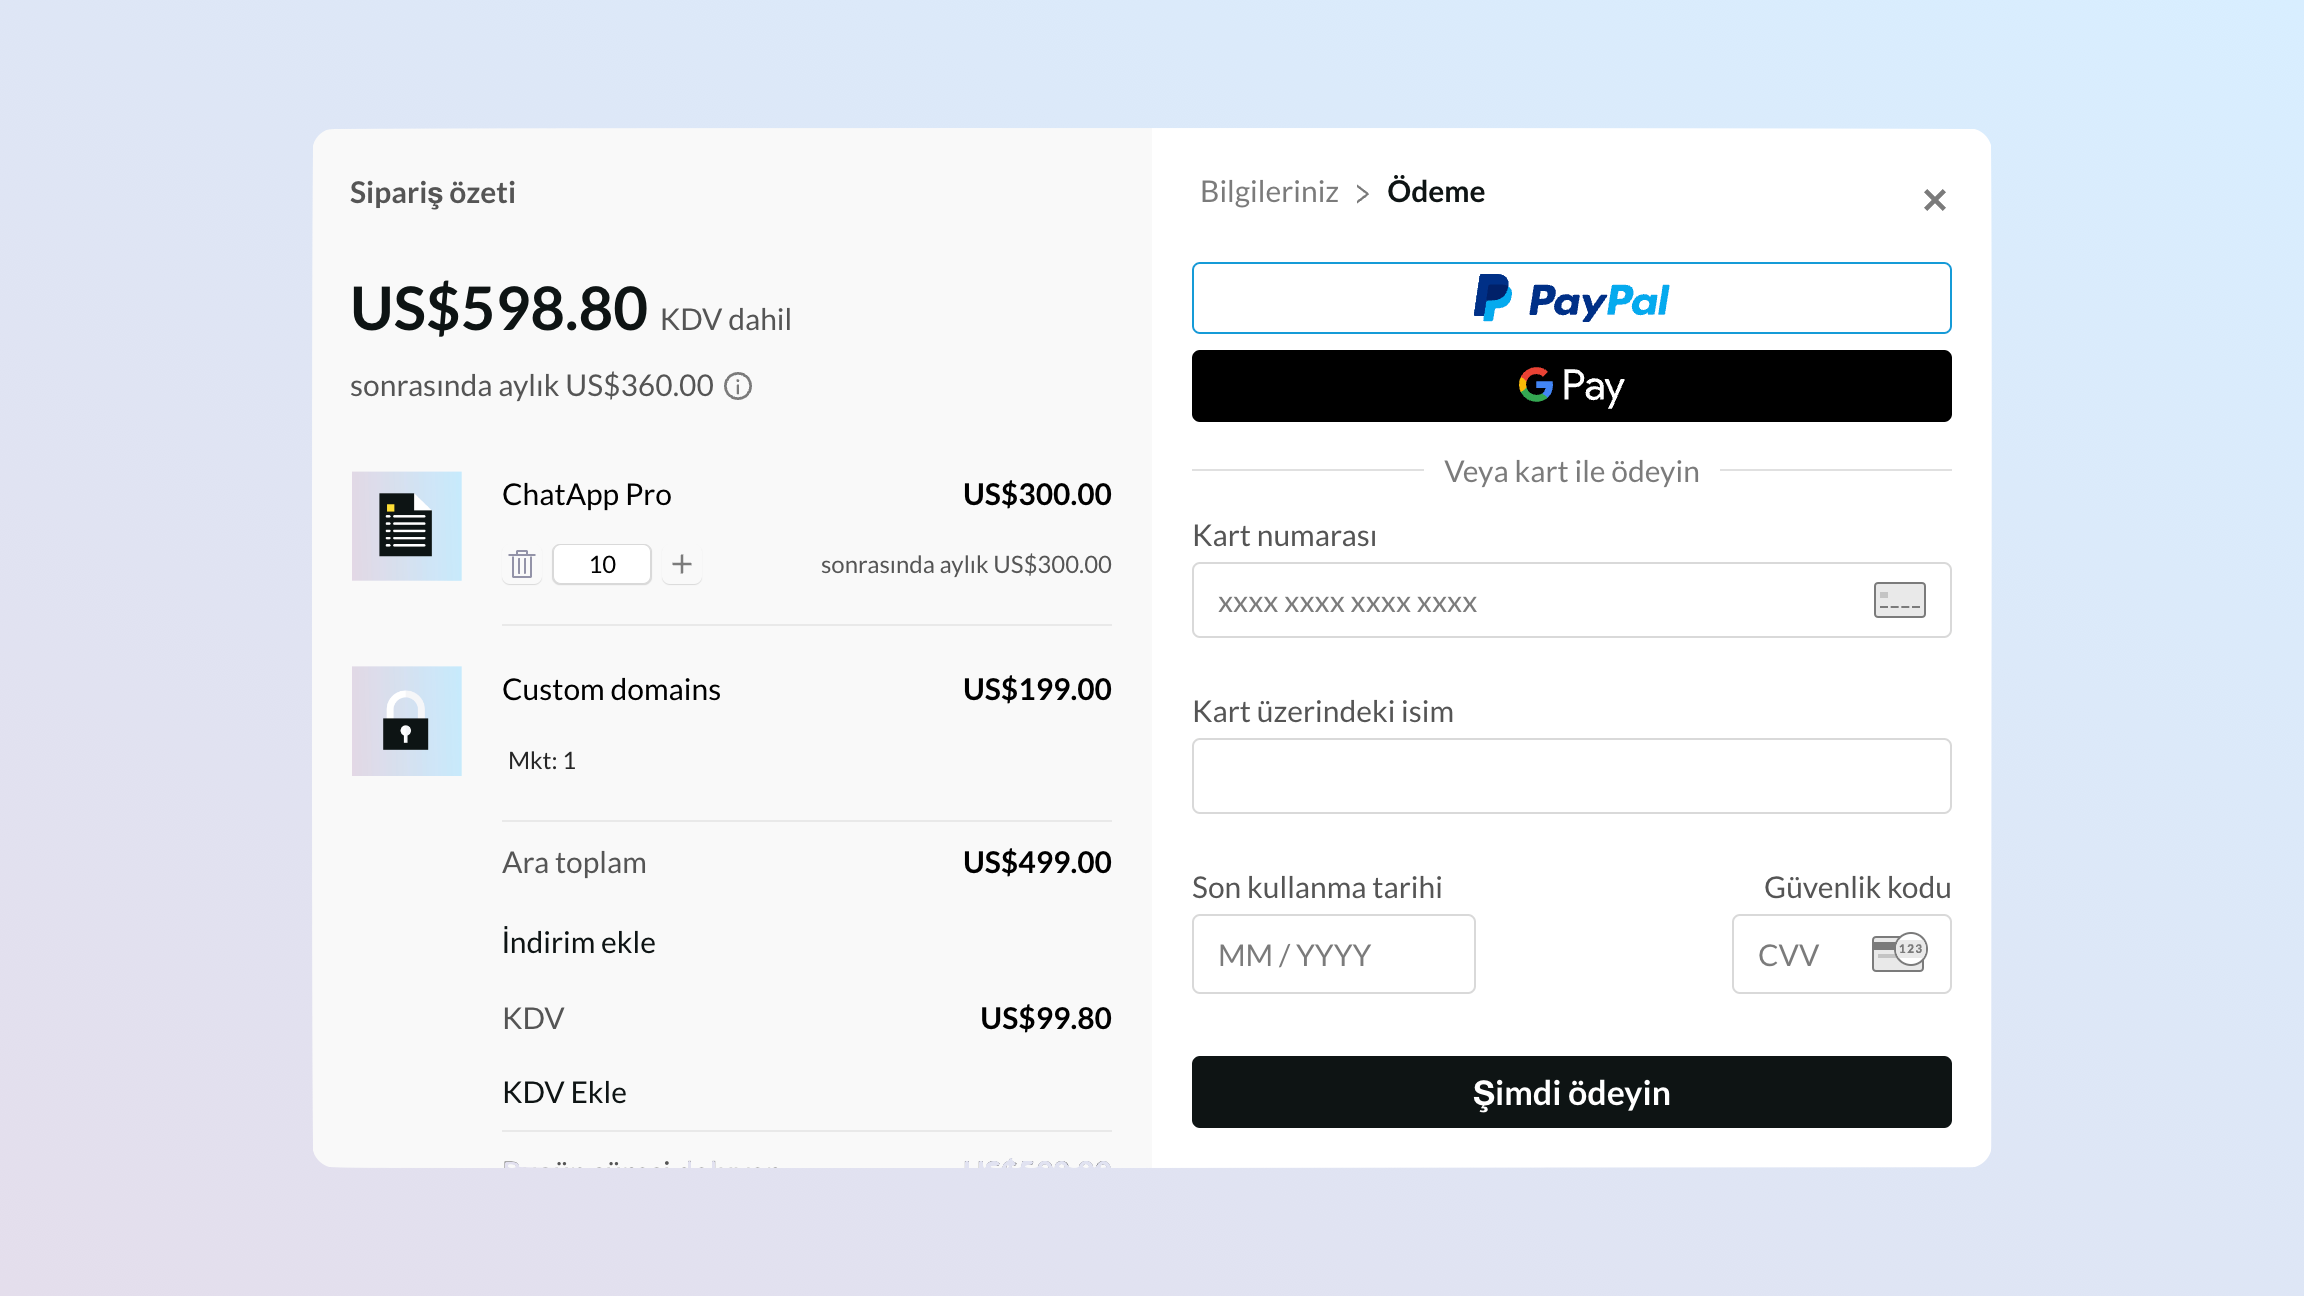 Screenshot of overlay checkout in Turkish on the payment screen. There are two items on the checkout, displayed on the left. On the right hand side are buttons to pay using PayPal and Google Pay. Under this is the payment form.